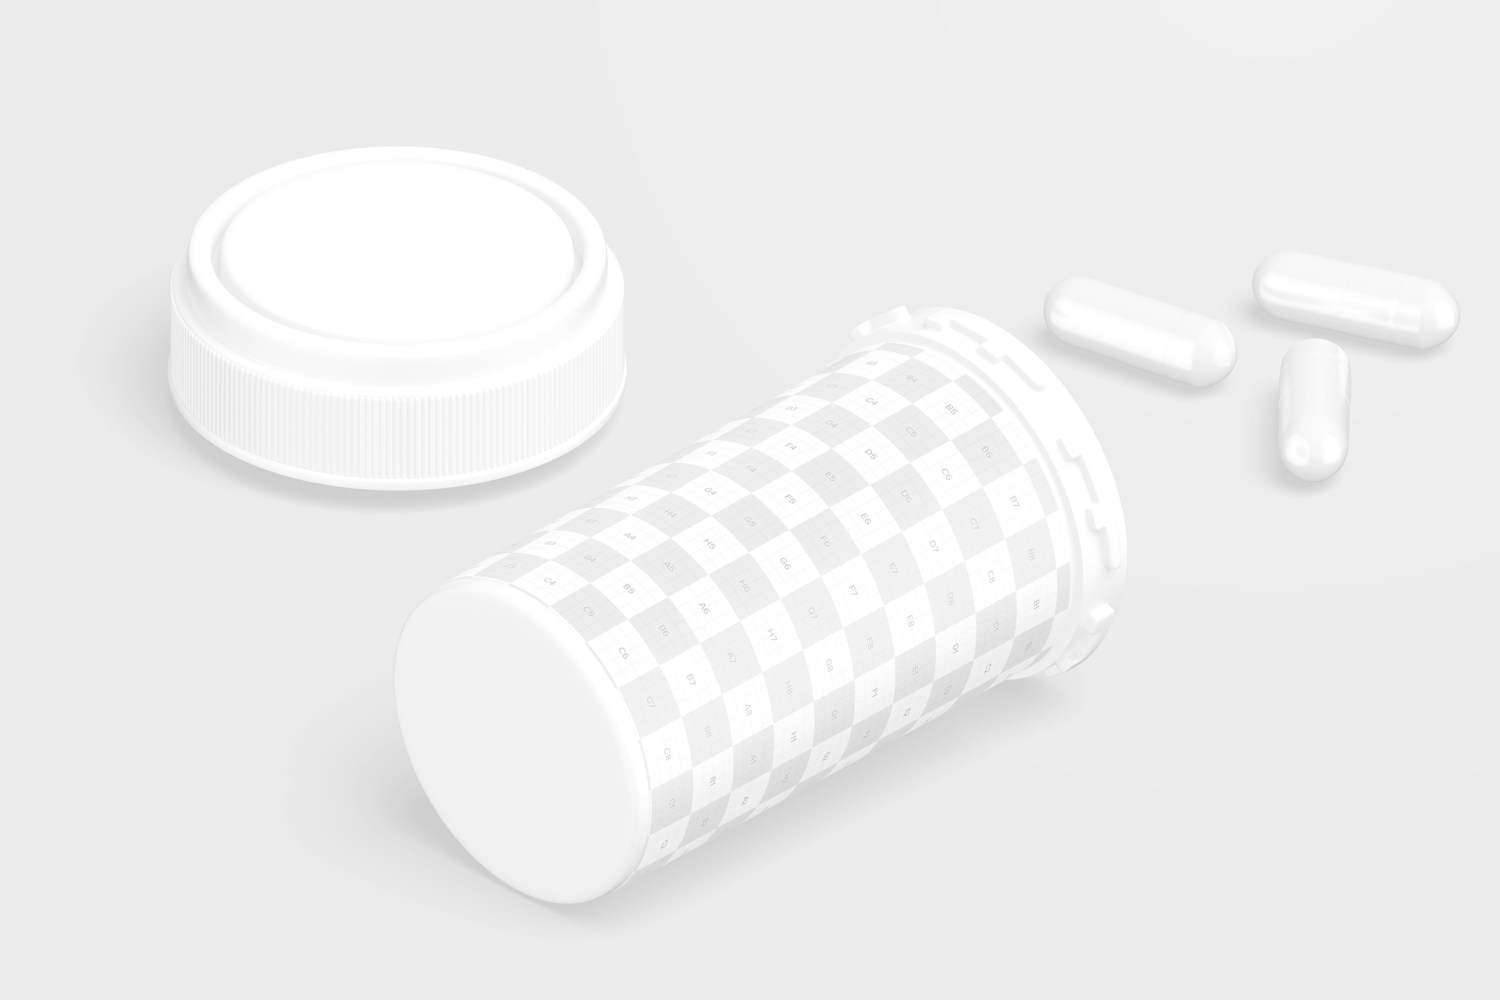 20 Dram Vial with Reversible Cap Mockup, Isometric Opened View